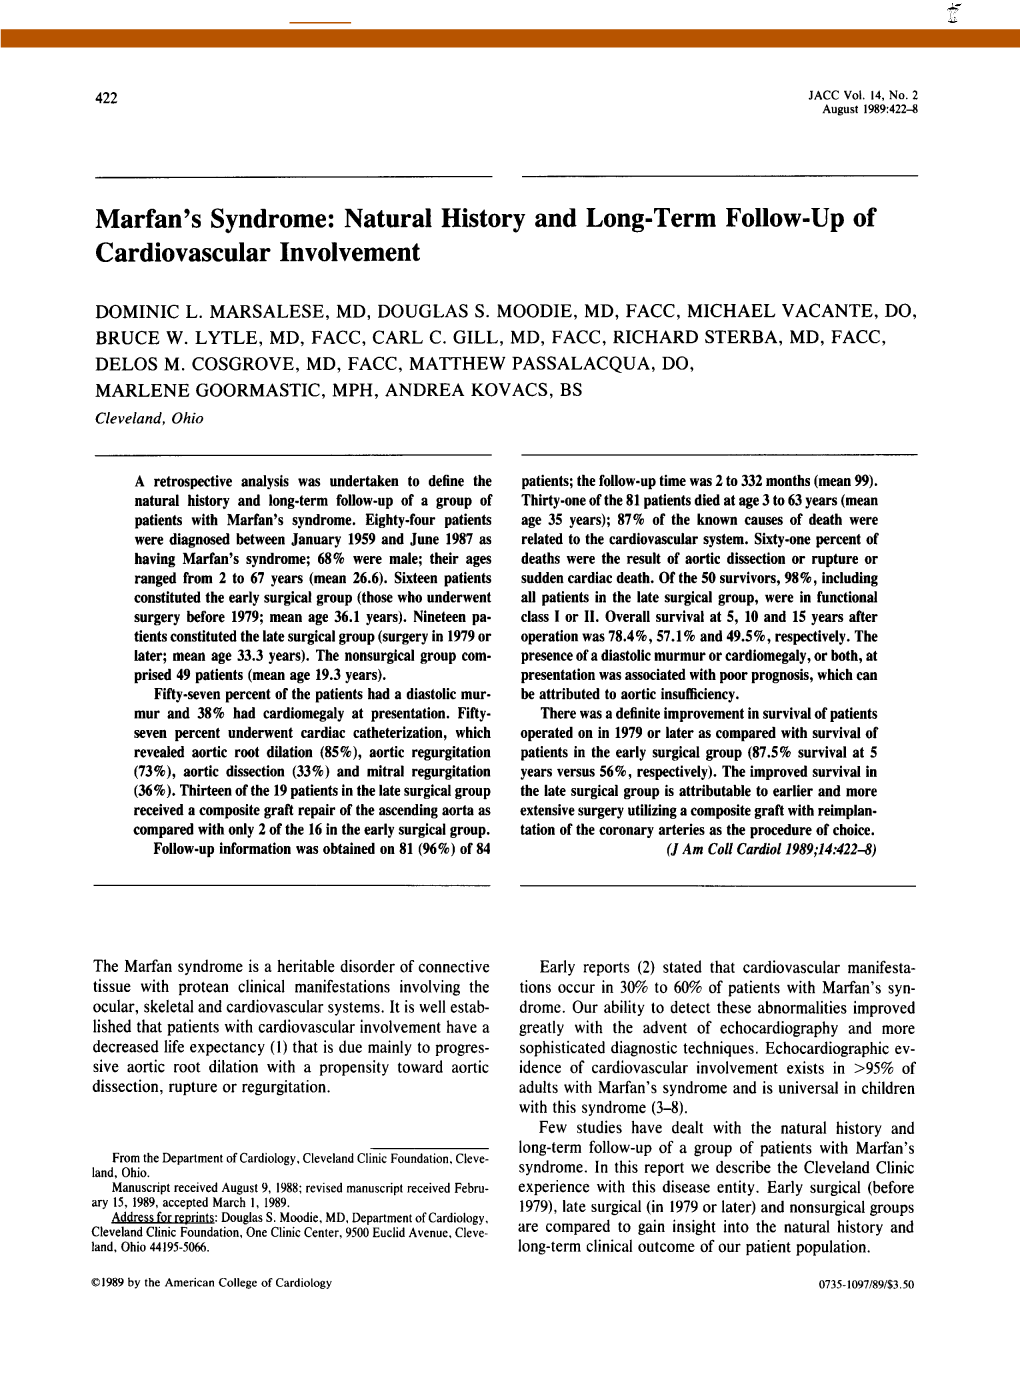 Marfan's Syndrome: Natural History and Long-Term Follow-Up Of